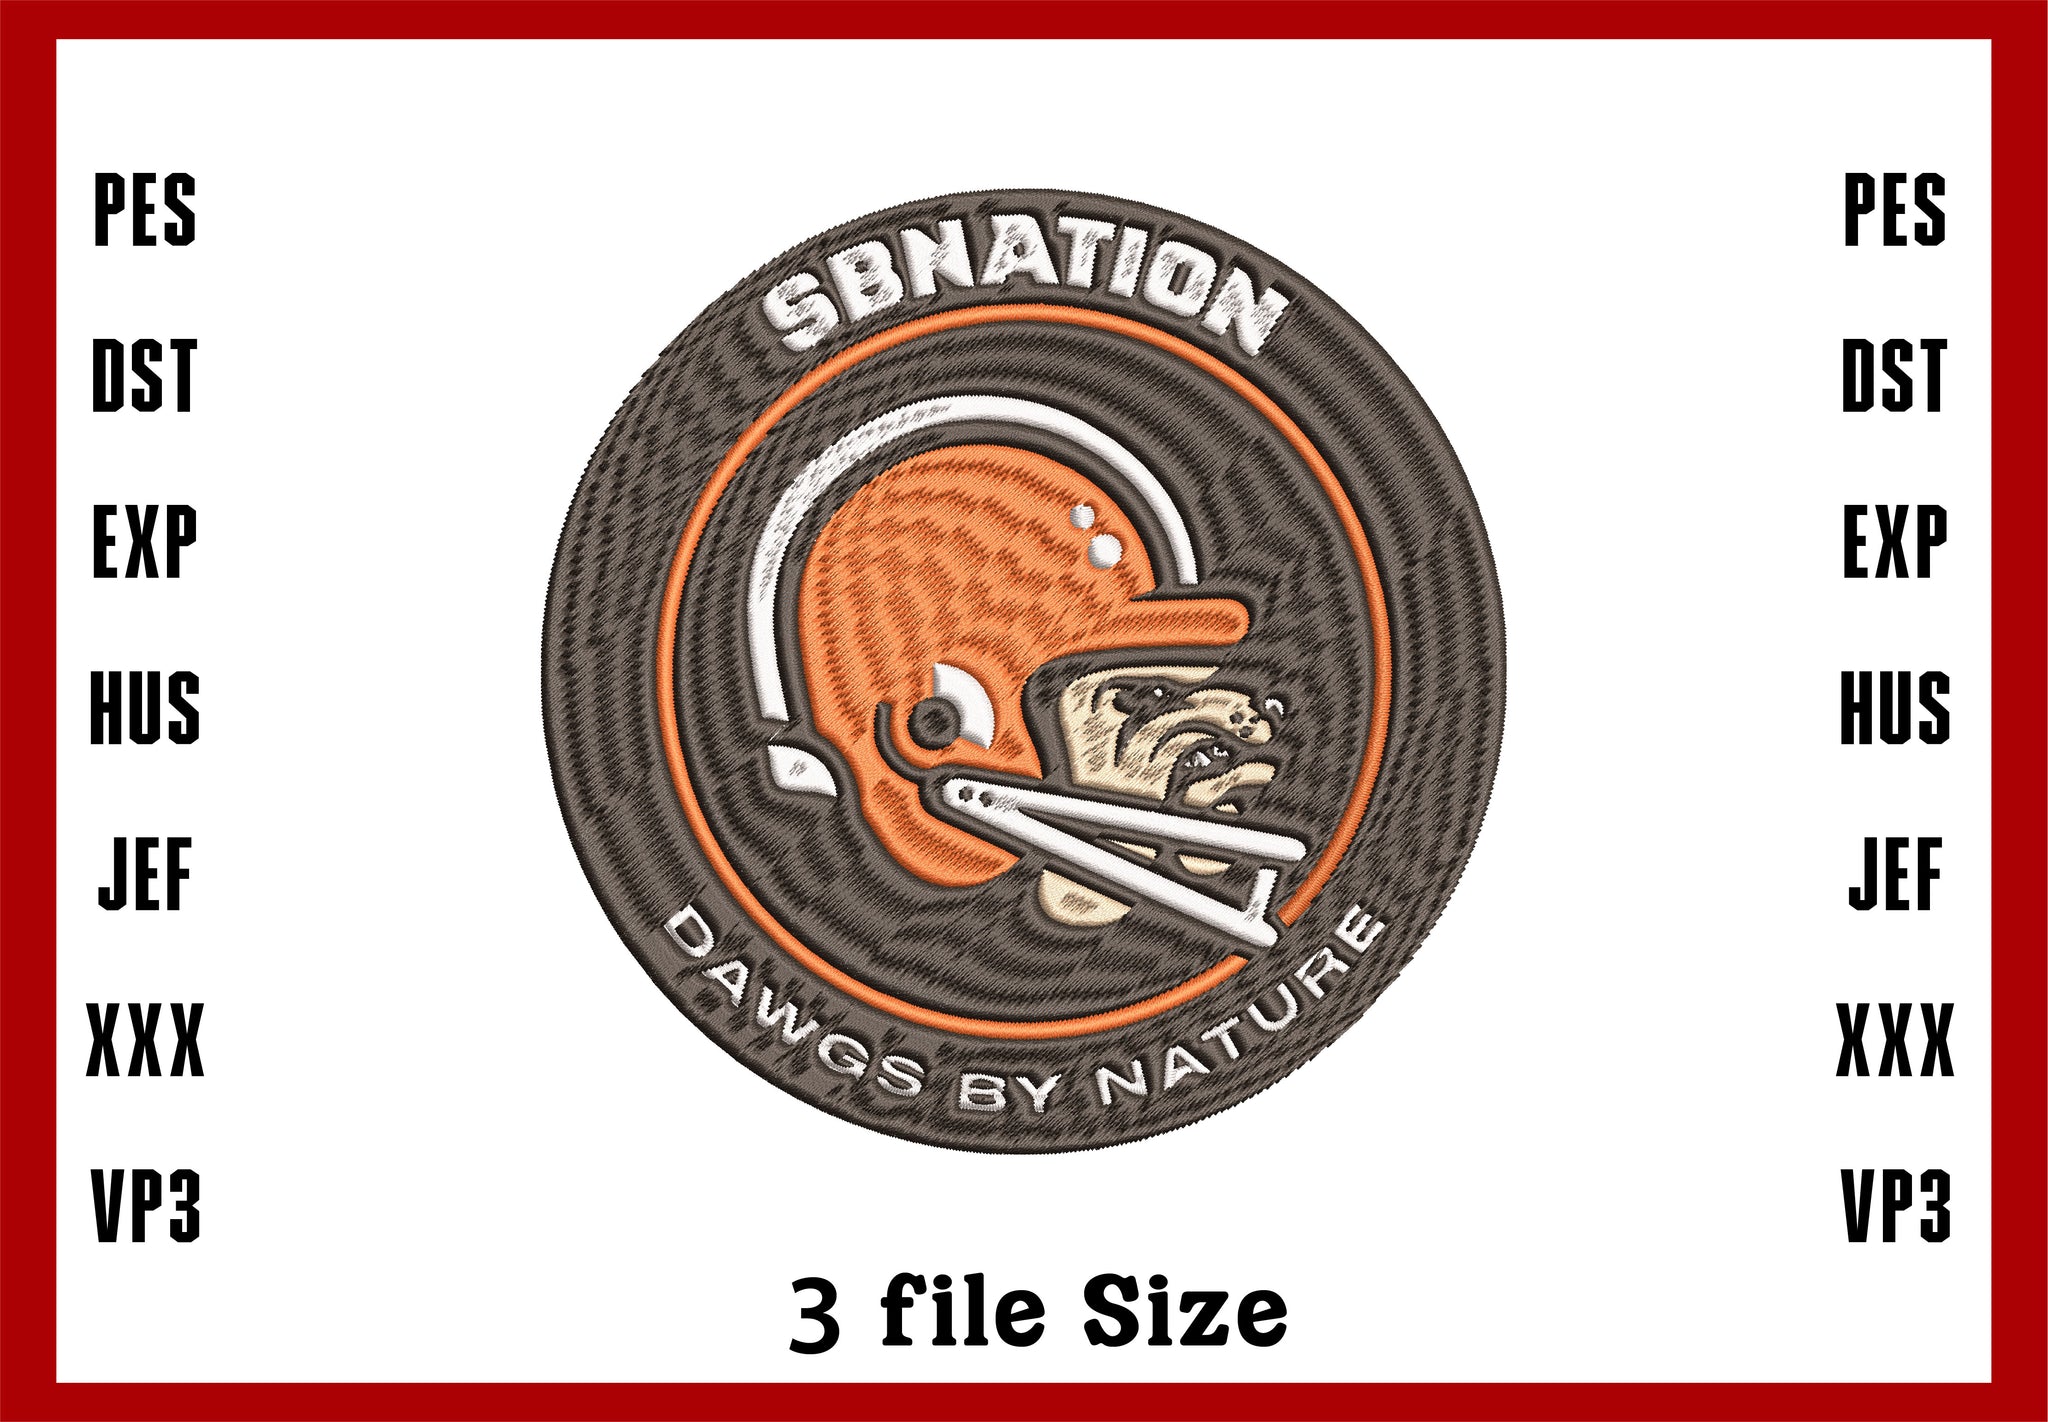 Cleveland Browns Football Helmet, Machine Embroidery Design, 3 File sizes- Instant Download & PDF File